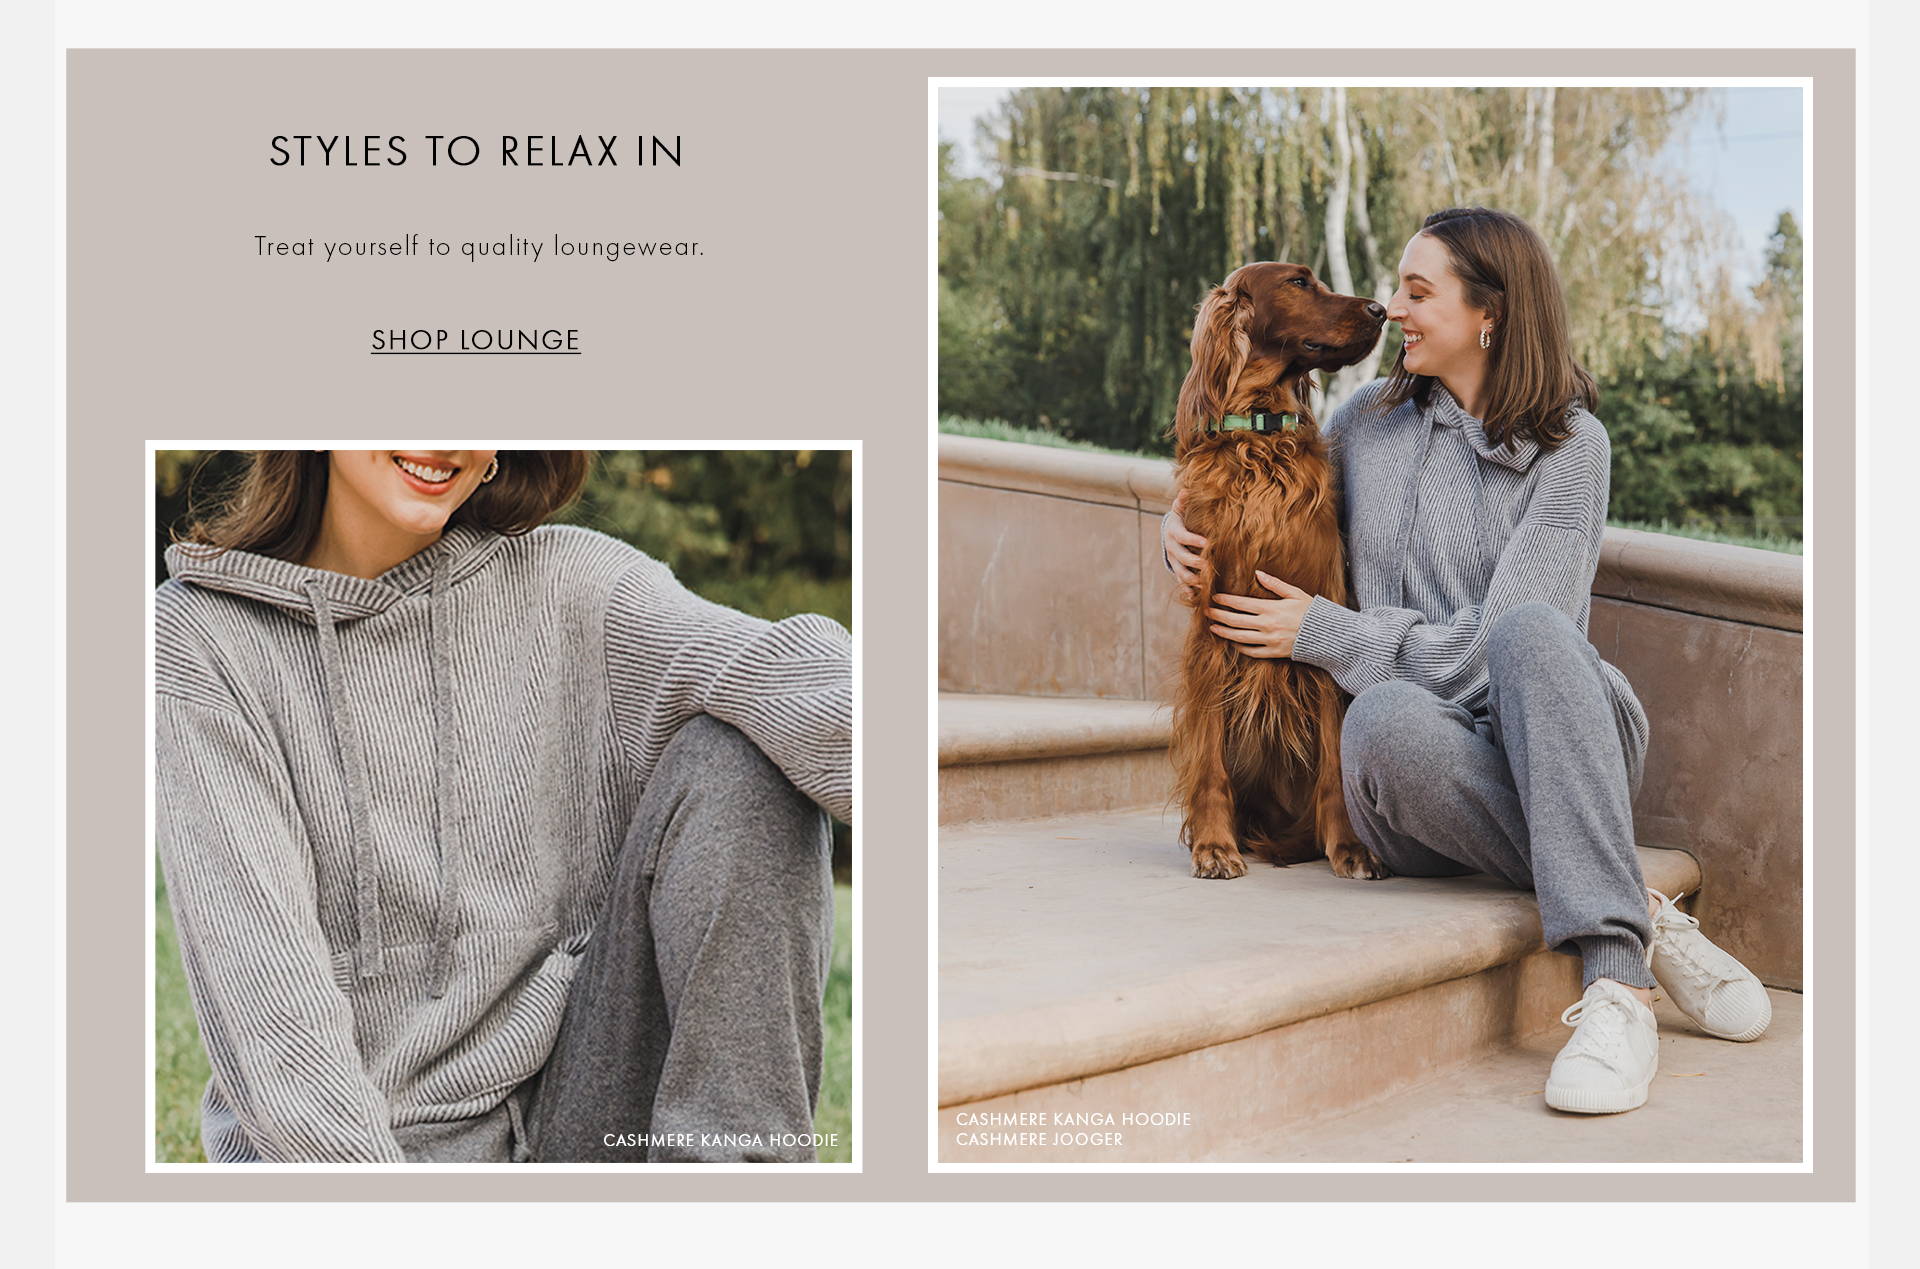 Styles to relax in. treat yourself to quality loungewear. Shop lounge texts on the images with a closed view of a grey hoodie and a  woman wearing a grey hoodie and a pair of grey jogger, sitting on stairs with her dog sitting next to her.